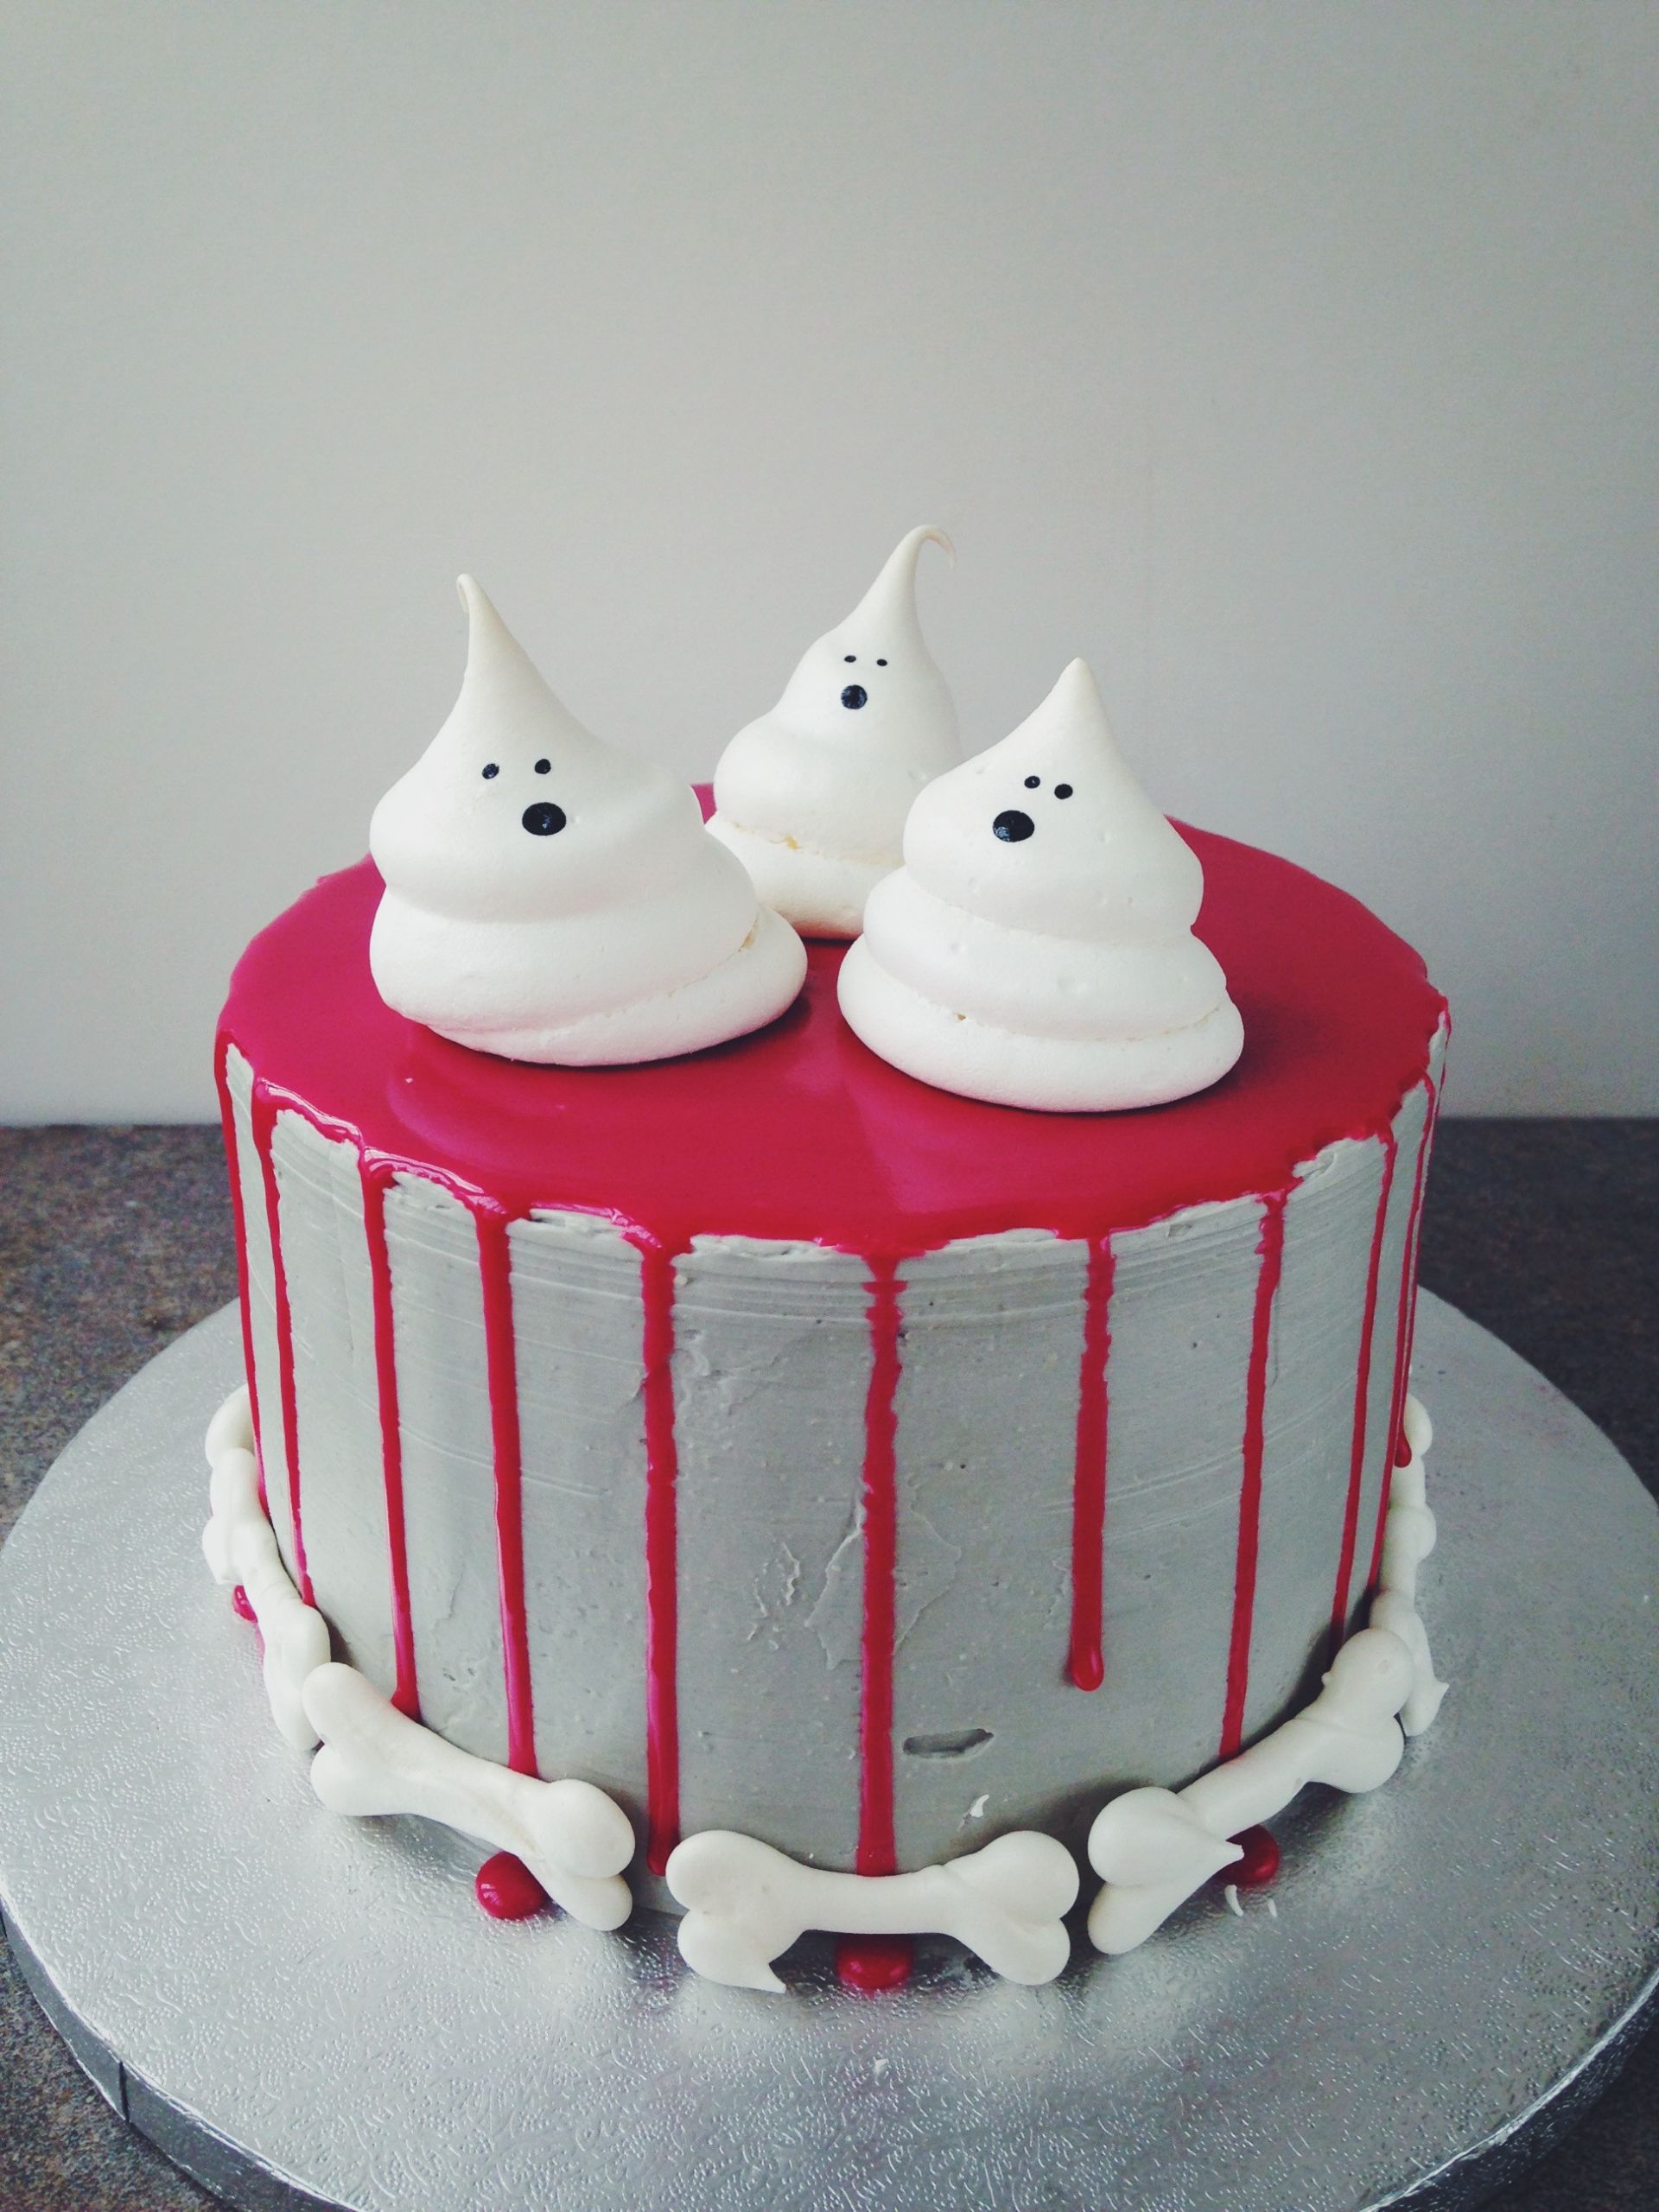 Simple Halloween Cakes
 Spooky Halloween Blood Drip Cake with Meringue Ghosts and